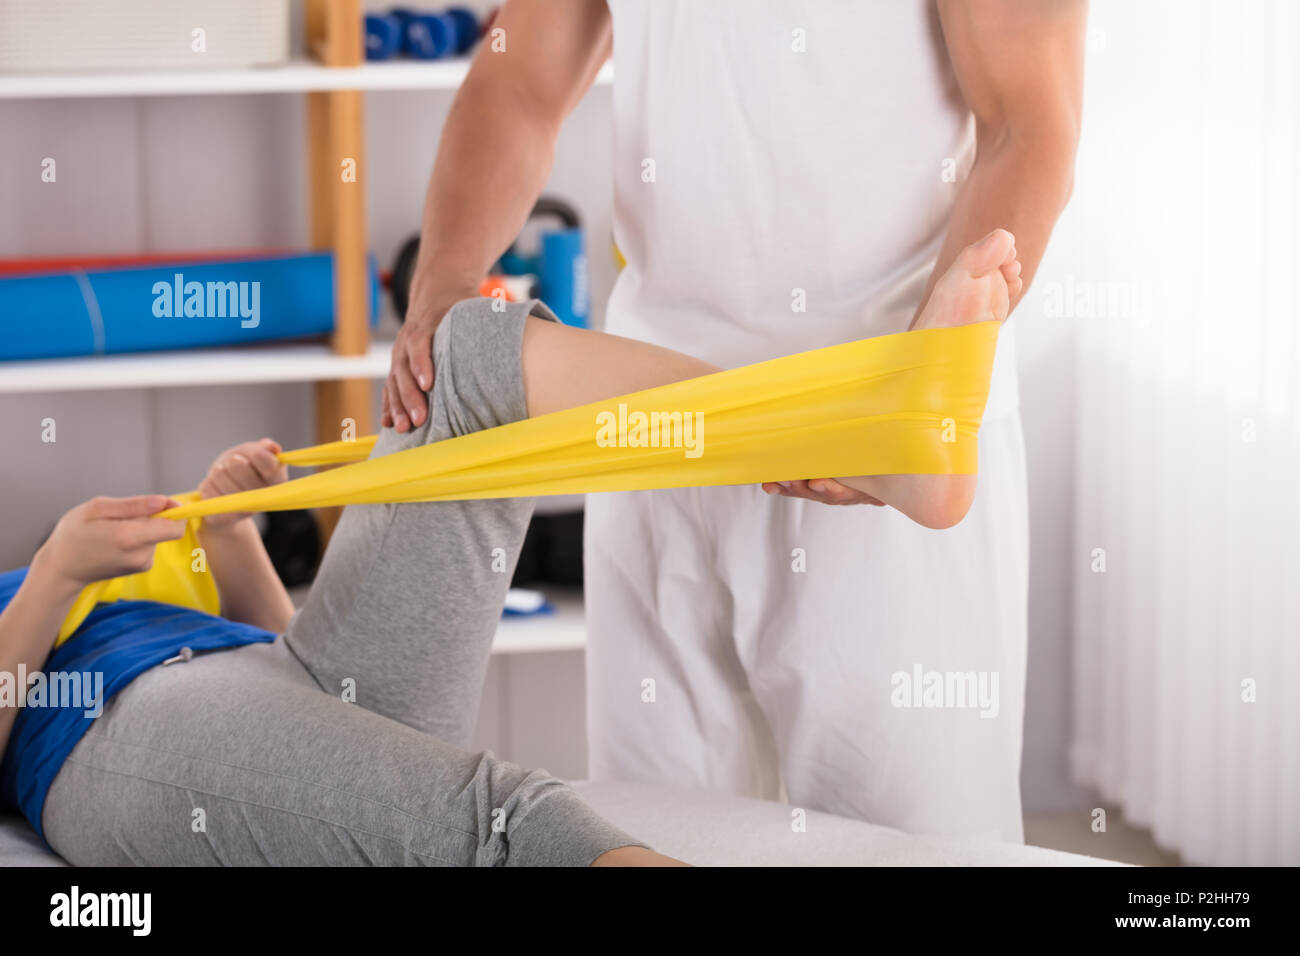 Physiotherapist Giving Leg Treatment To Woman With Yellow Exercise Band Stock Photo